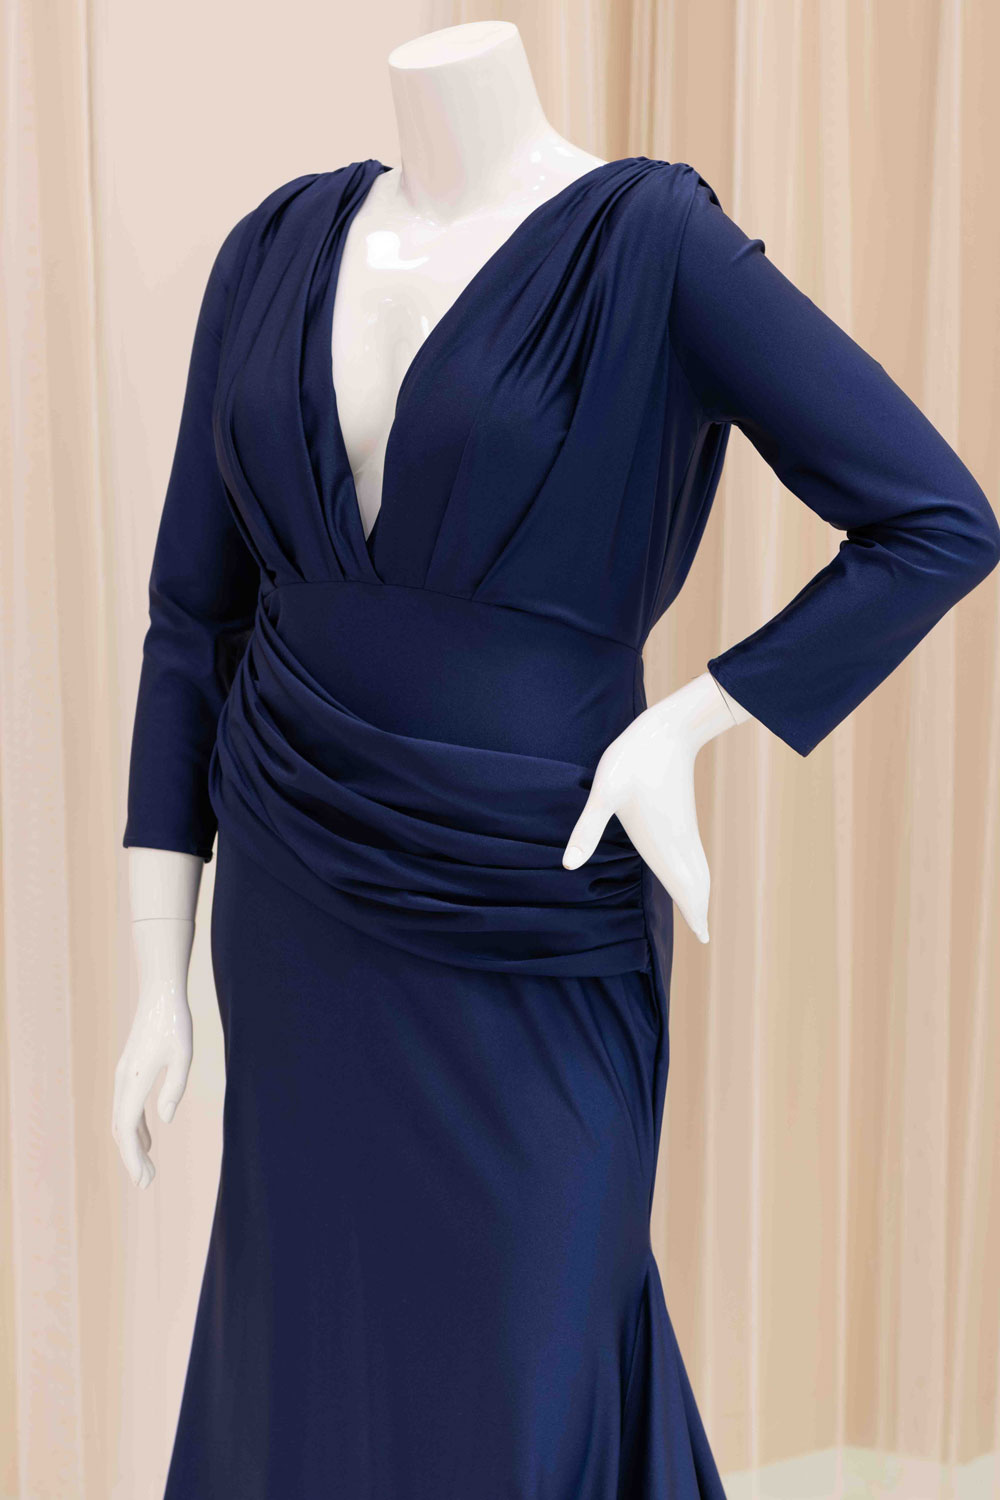 Cadee Long Sleeve Satin Evening Gown in Navy Blue